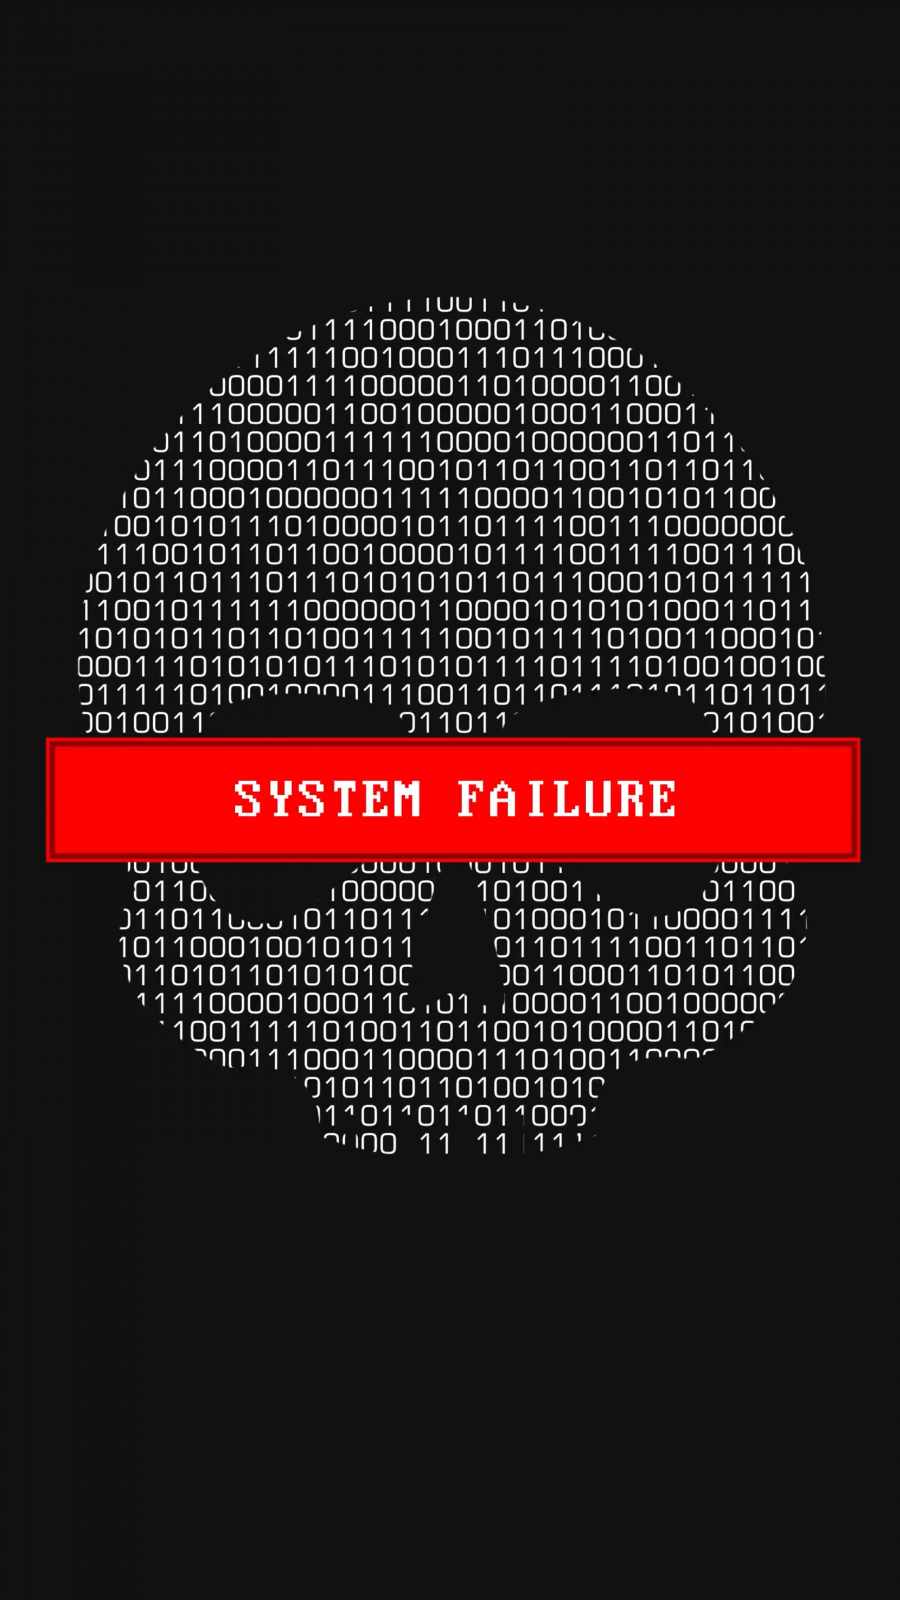 Failure Wallpapers